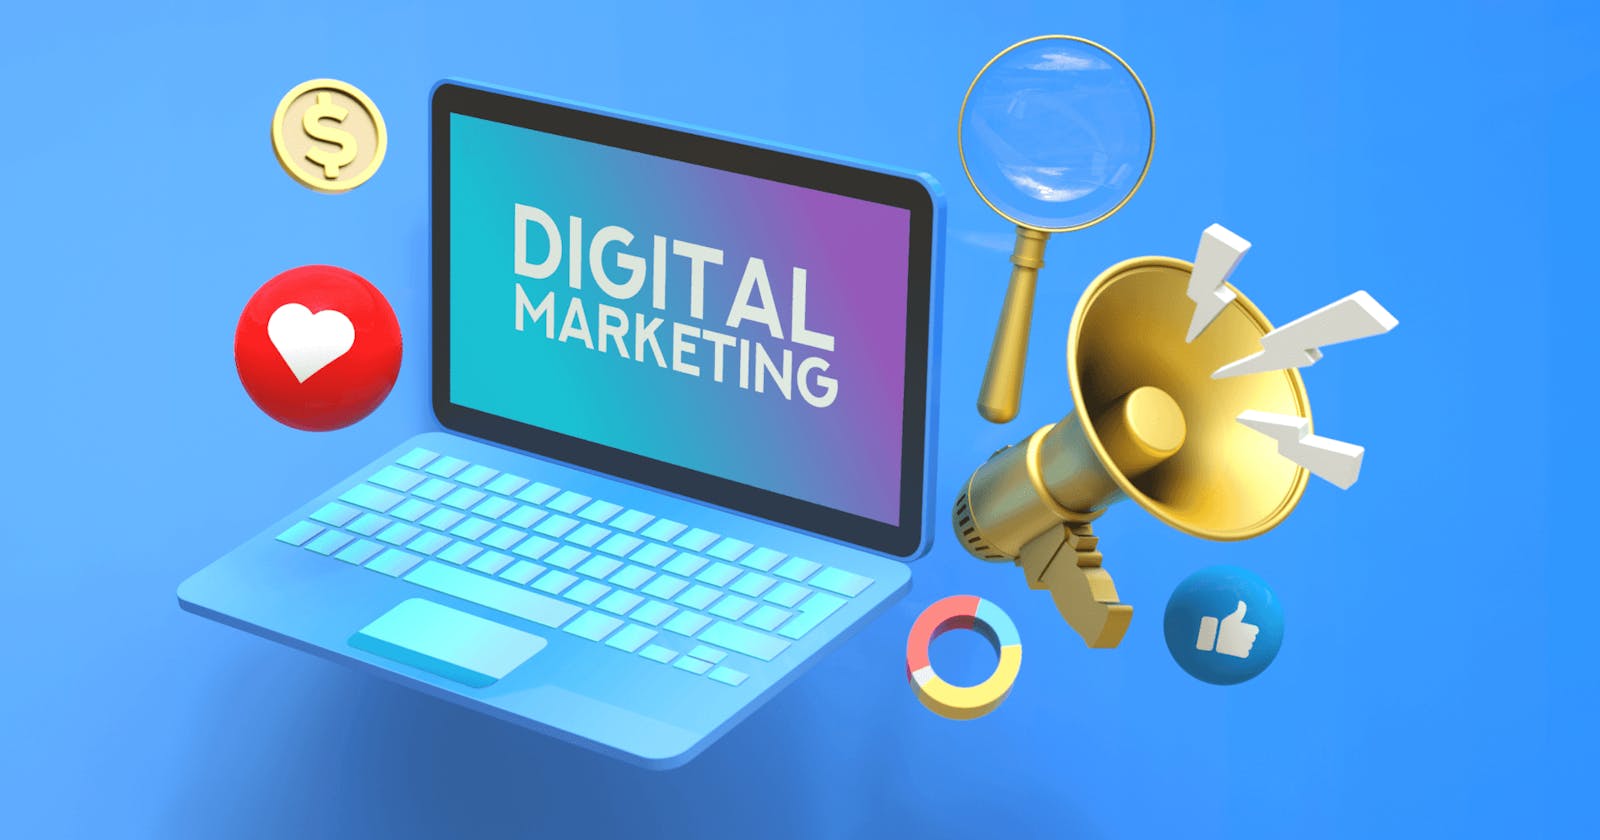 Digital marketing: What is it? How does digital marketing operate?